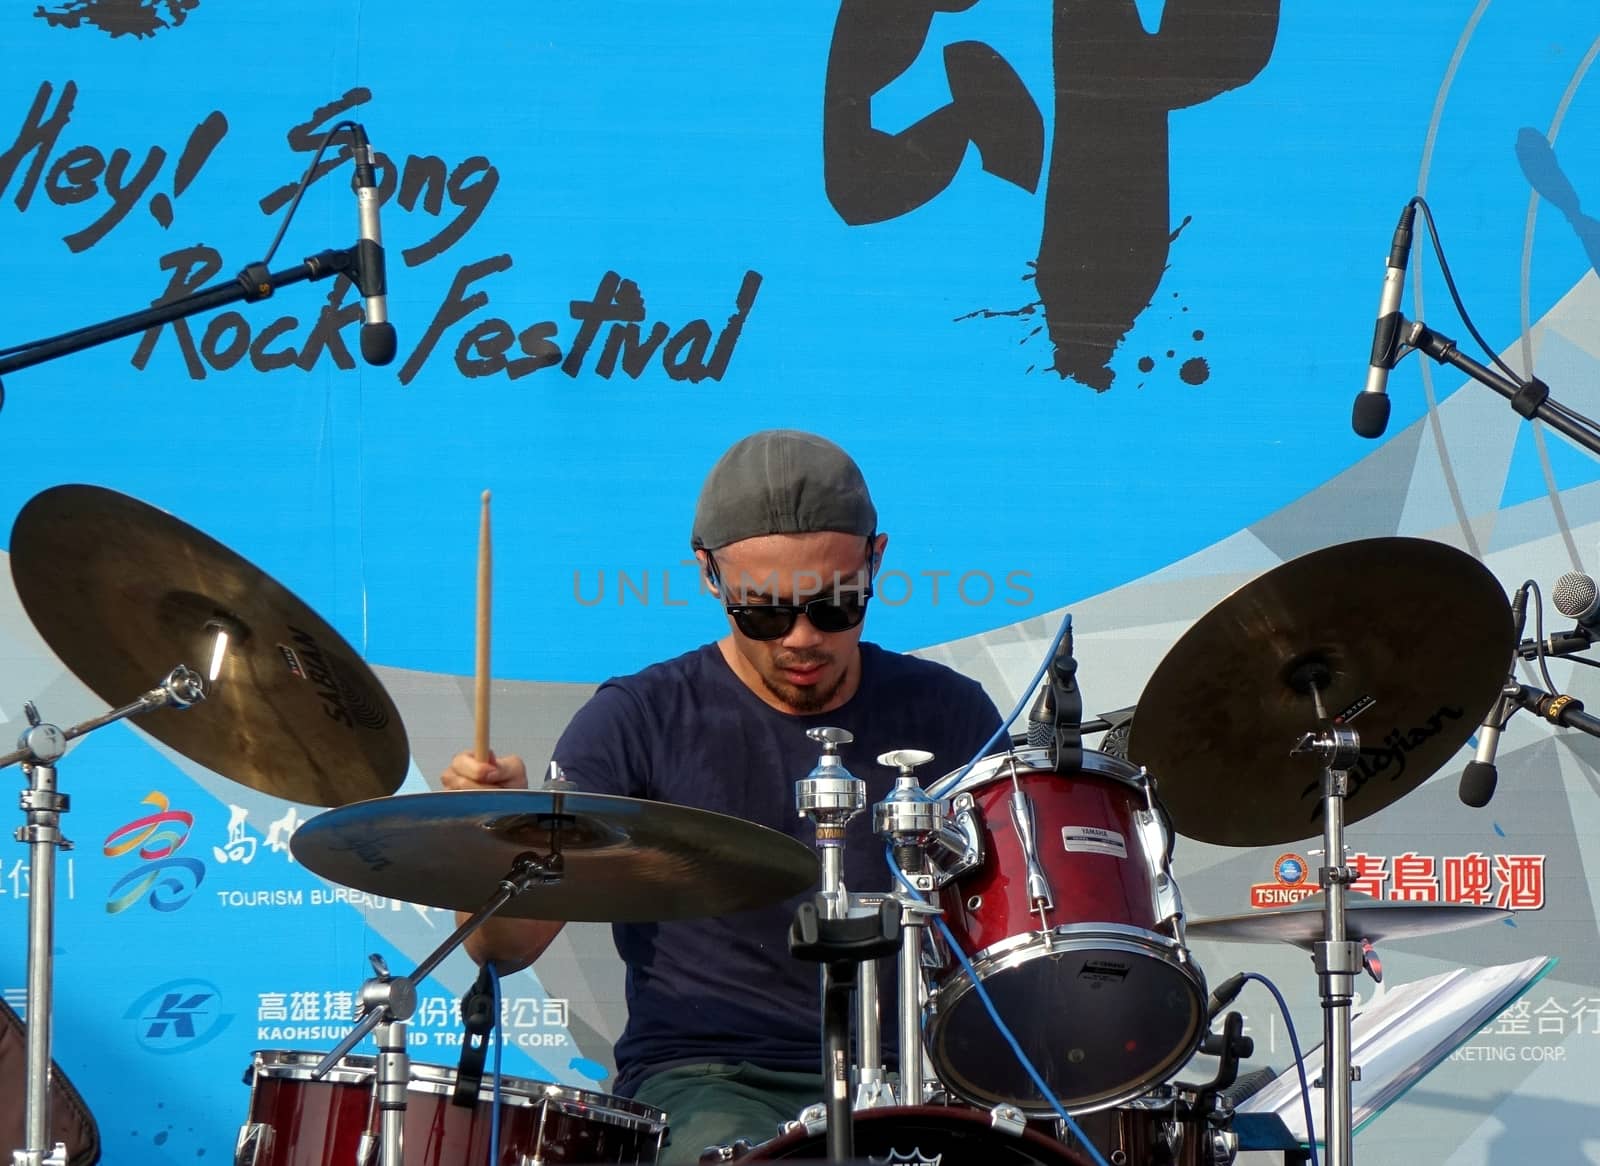 Drummer Performs at Rock Festival by shiyali